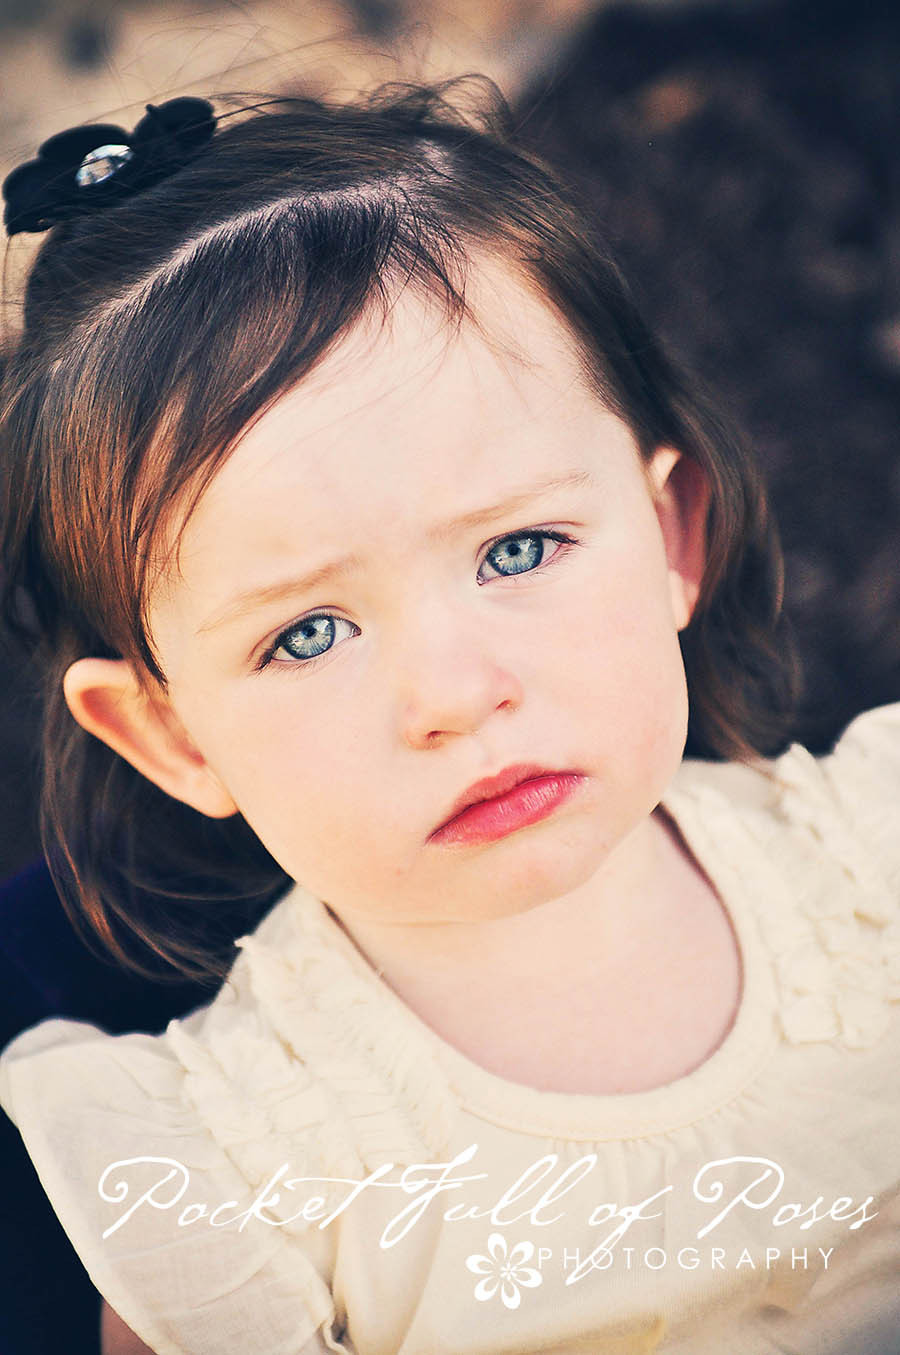 Baby With Blue Eyes And Black Hair
 Pocket Full of Poses graphy August 2011